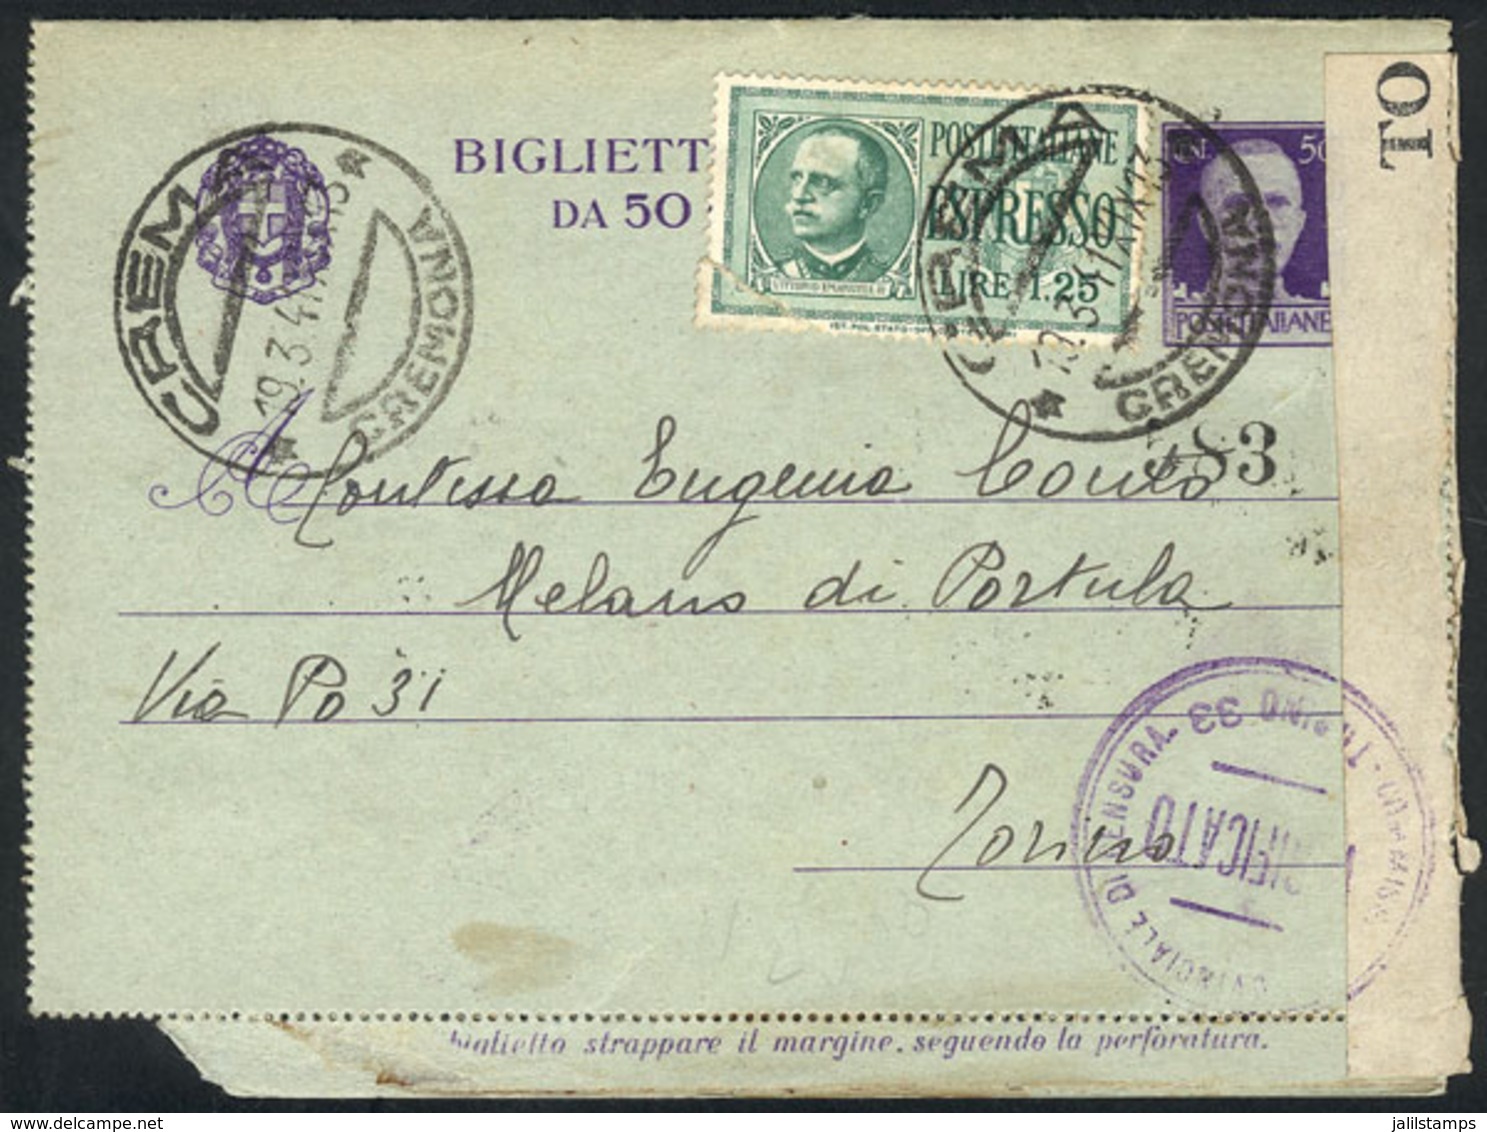 ITALY: 50c. Letter Card (biglietto Postale) + Express Stamp Of 1.25L., Sent From Crema To Torino On 19/MAR/1941, With Ce - Unclassified